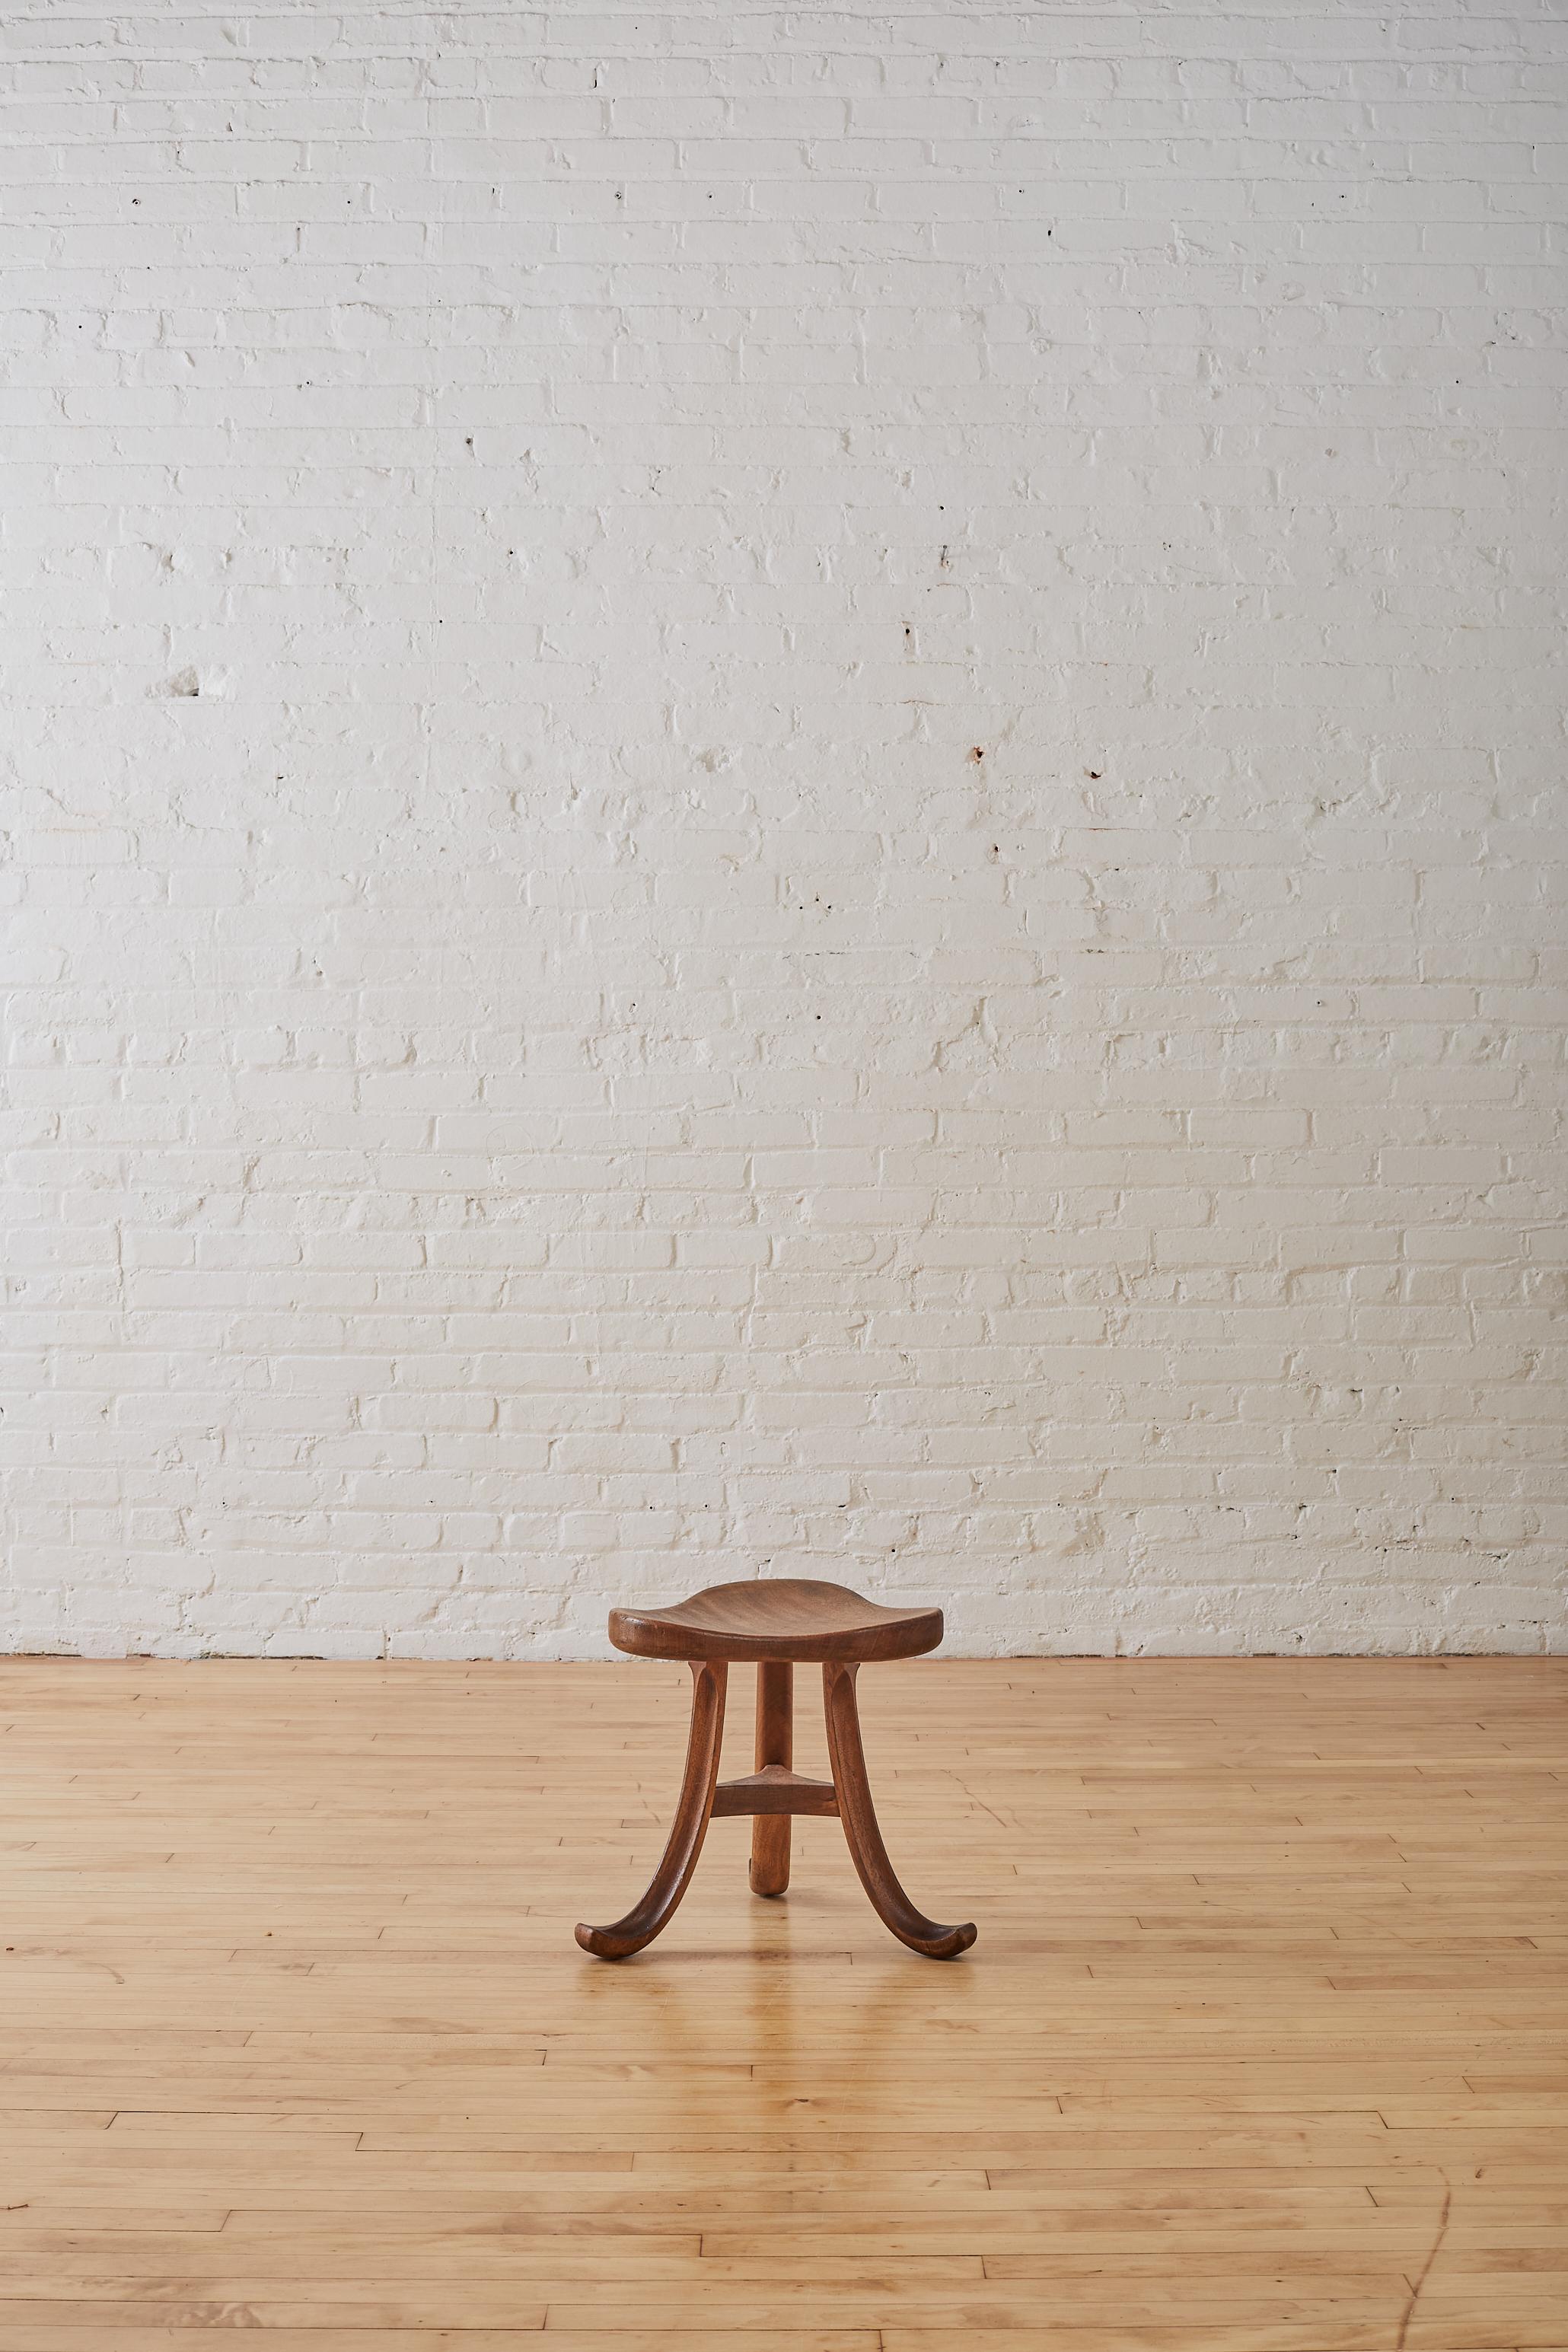 Viennese Walnut Stool with curved tripod legs.